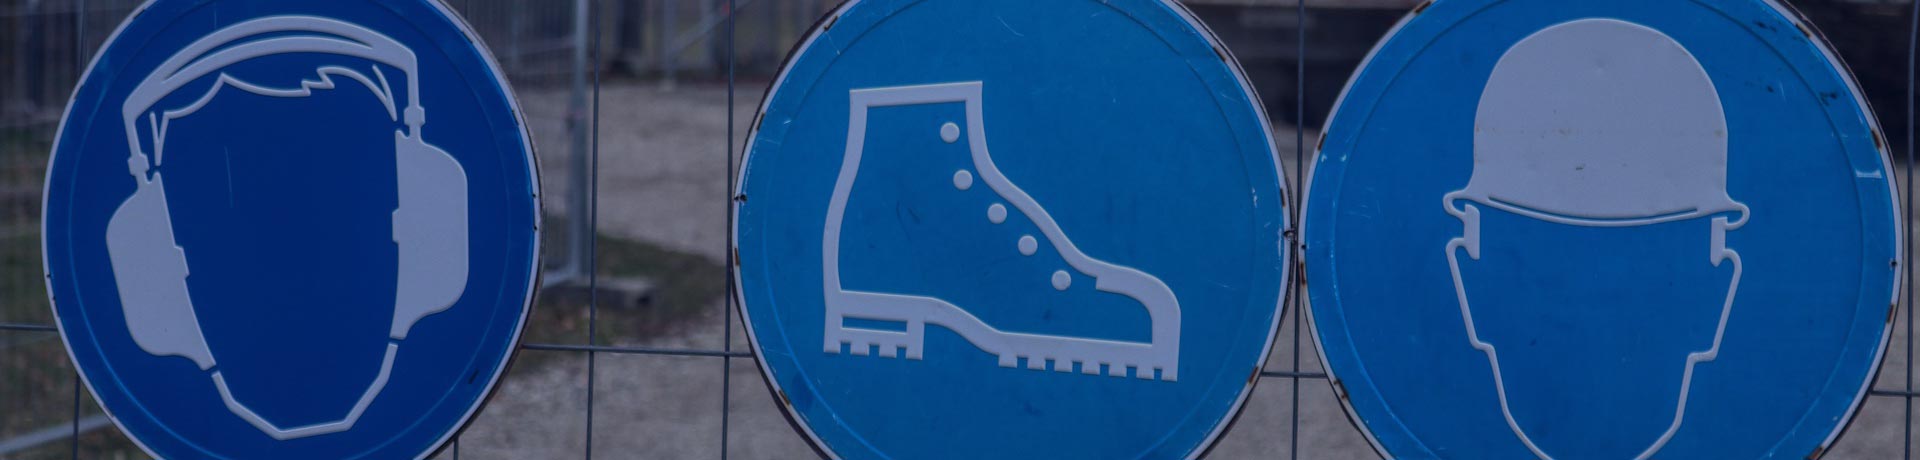 signs on a construction site indicating the main compulsory personal protective equipment